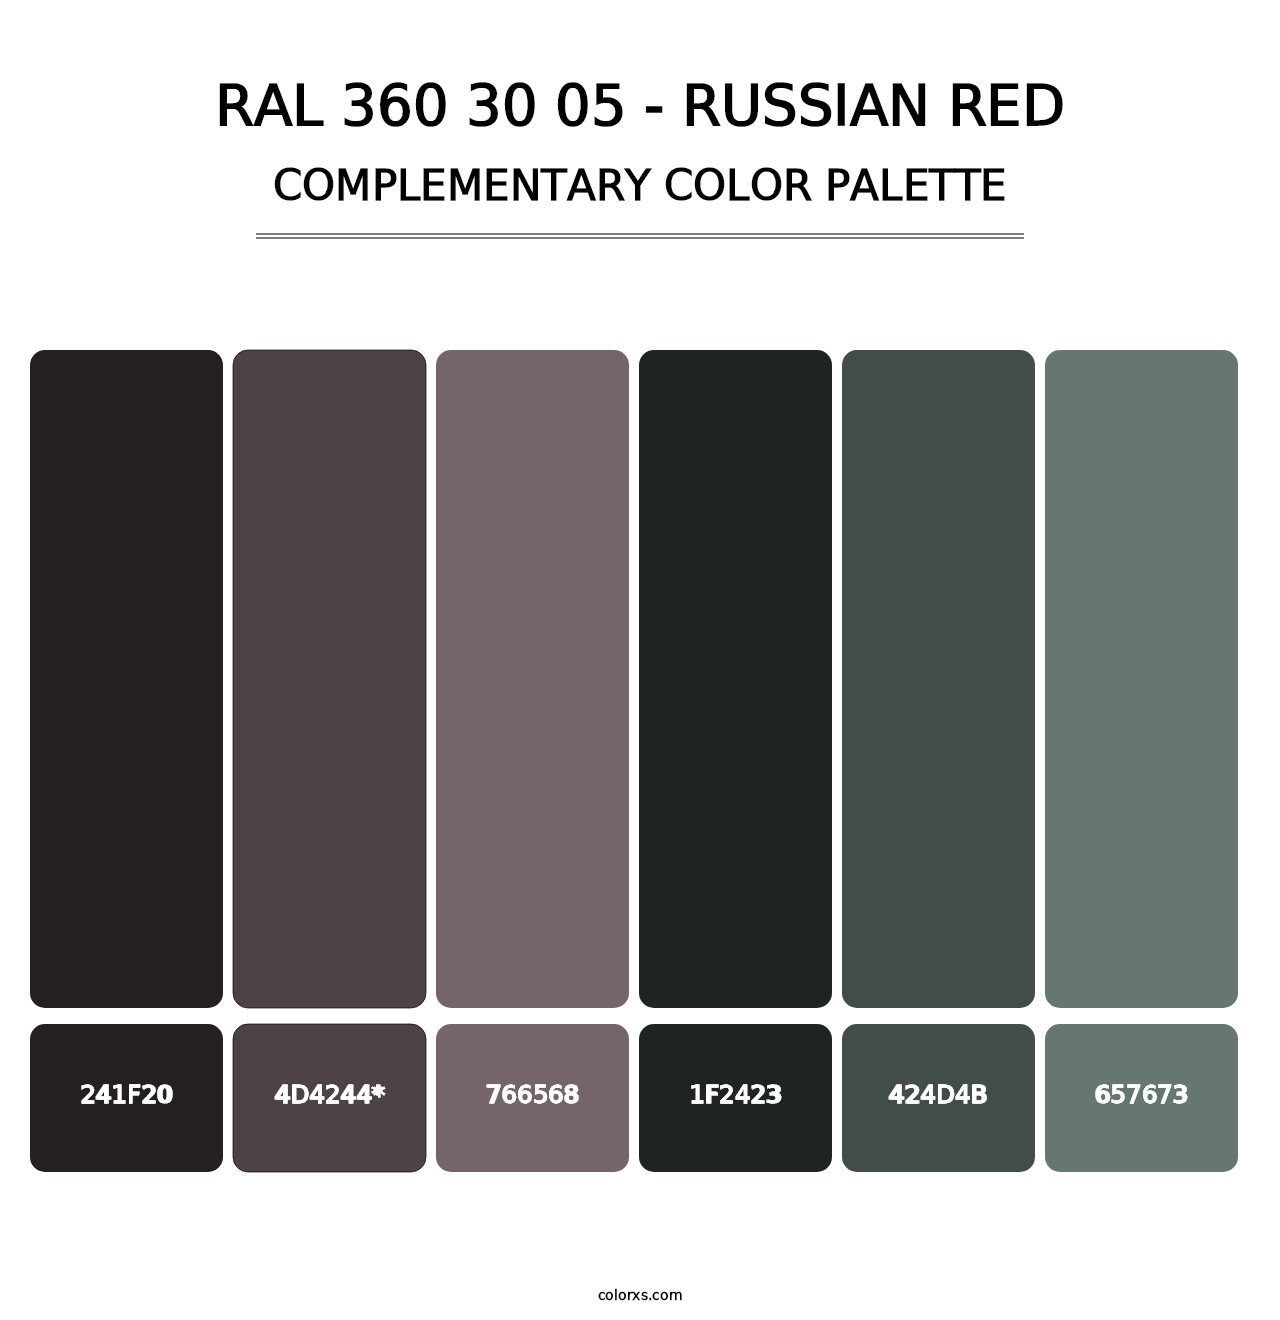 RAL 360 30 05 - Russian Red - Complementary Color Palette